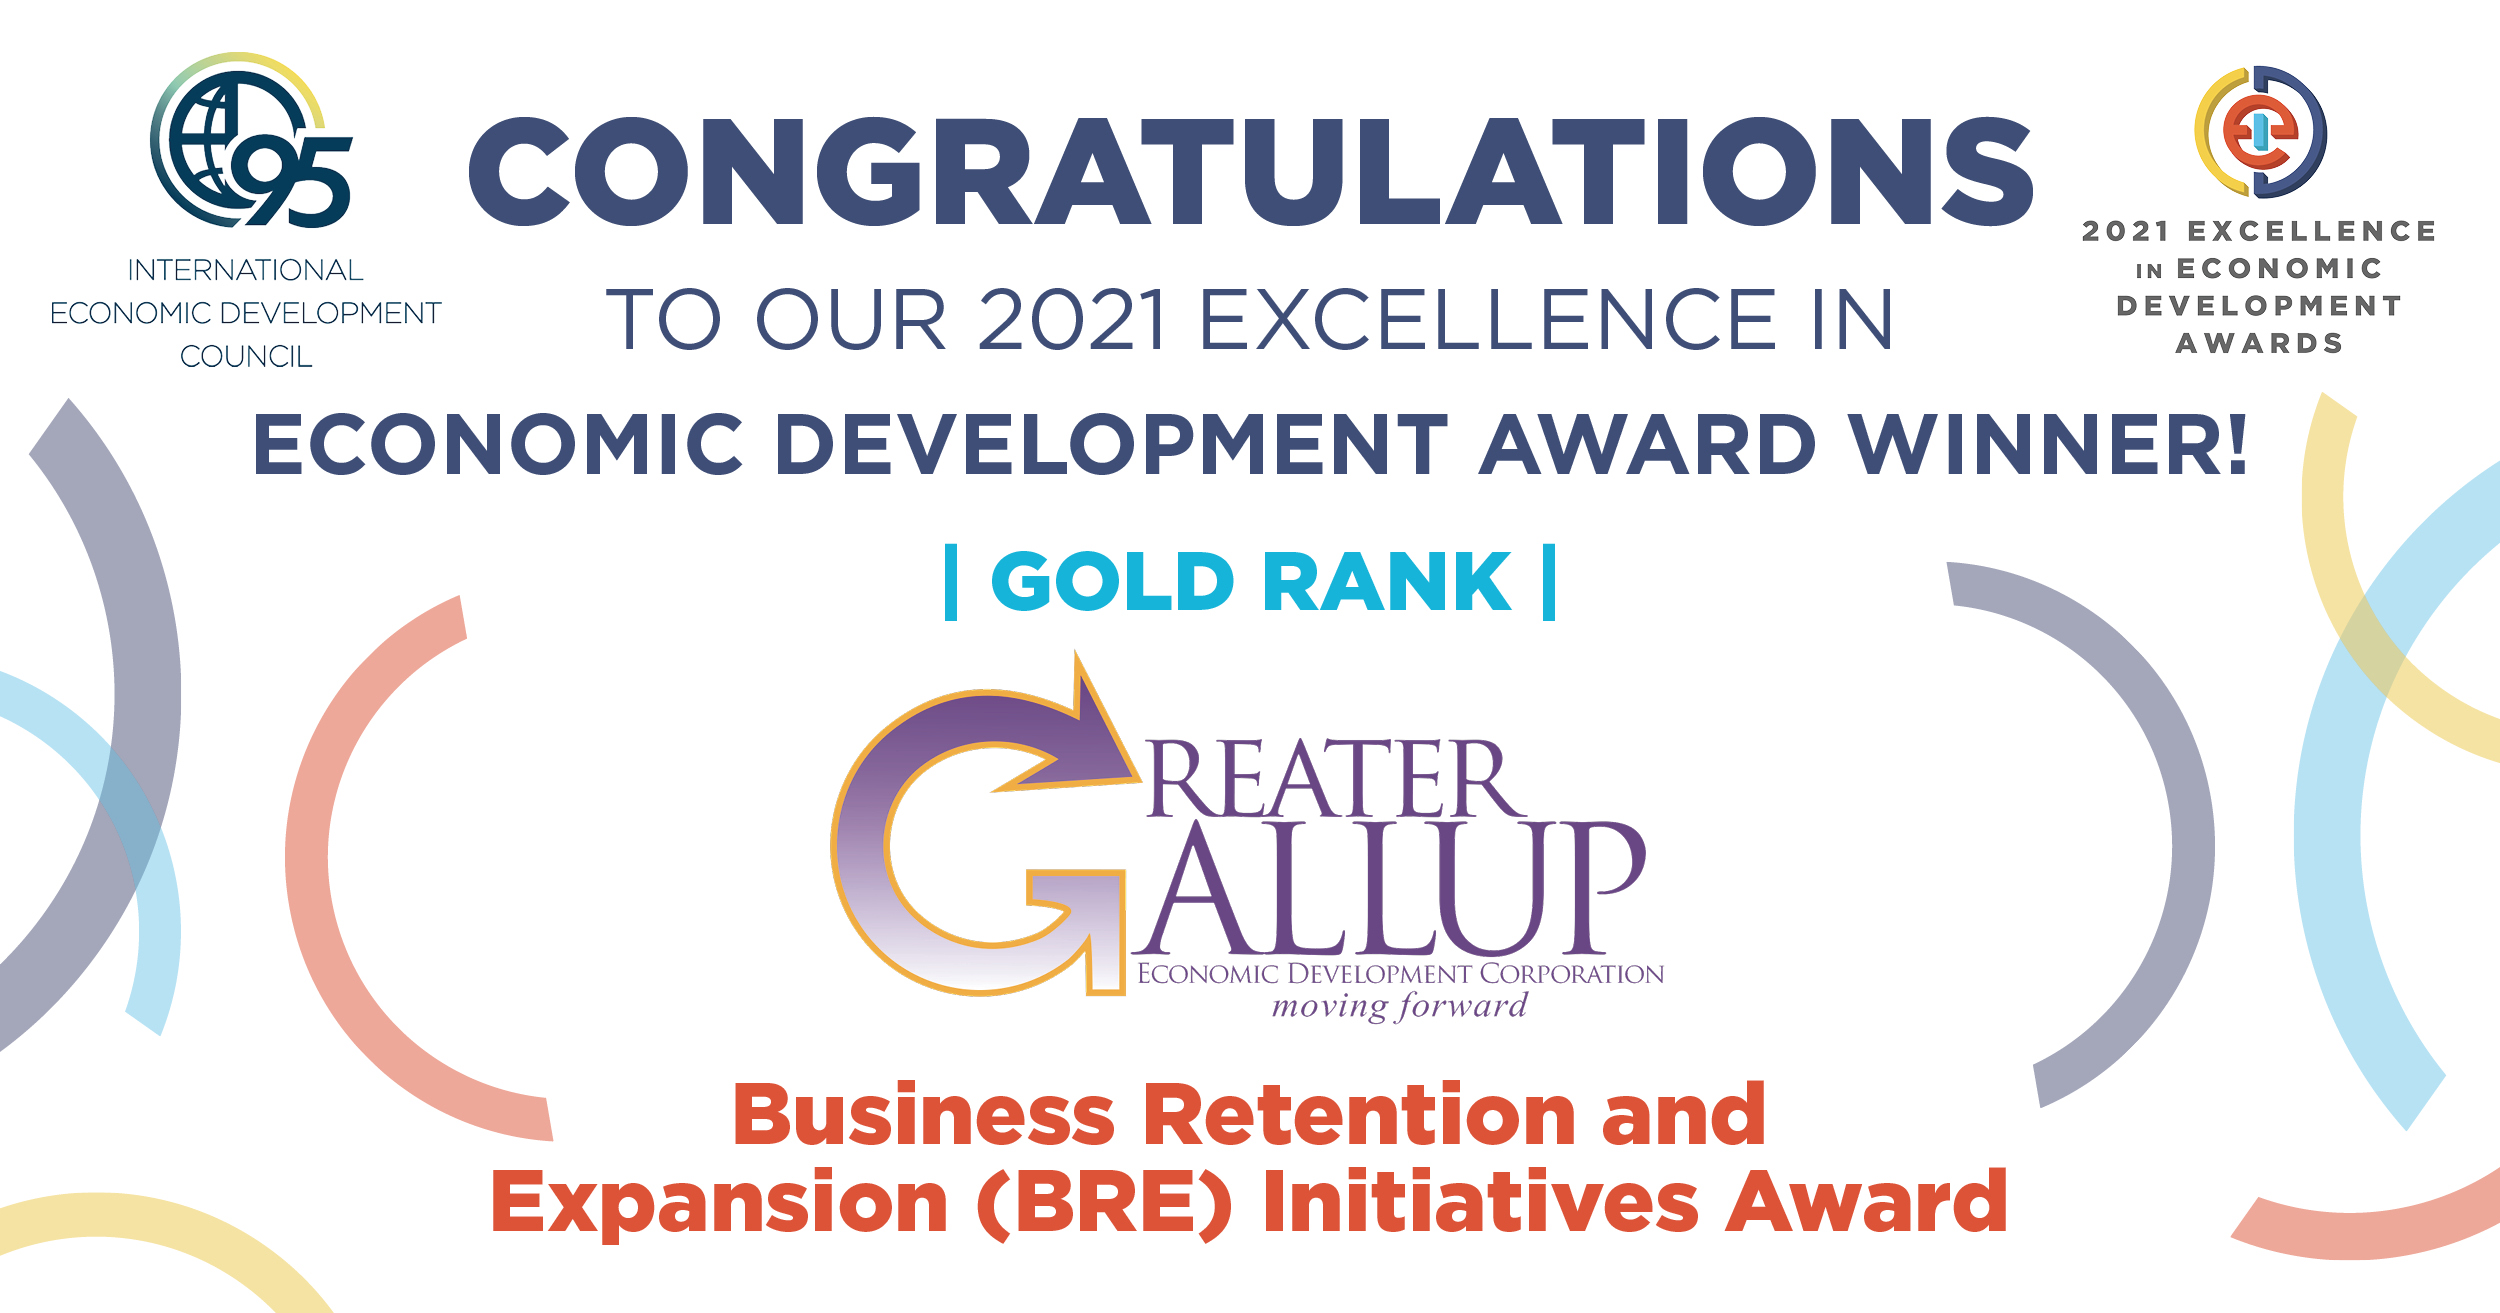 Greater Gallup Economic Development Corporation Earns Gold Rank Excellence in Economic Development Award from the IEDC Photo